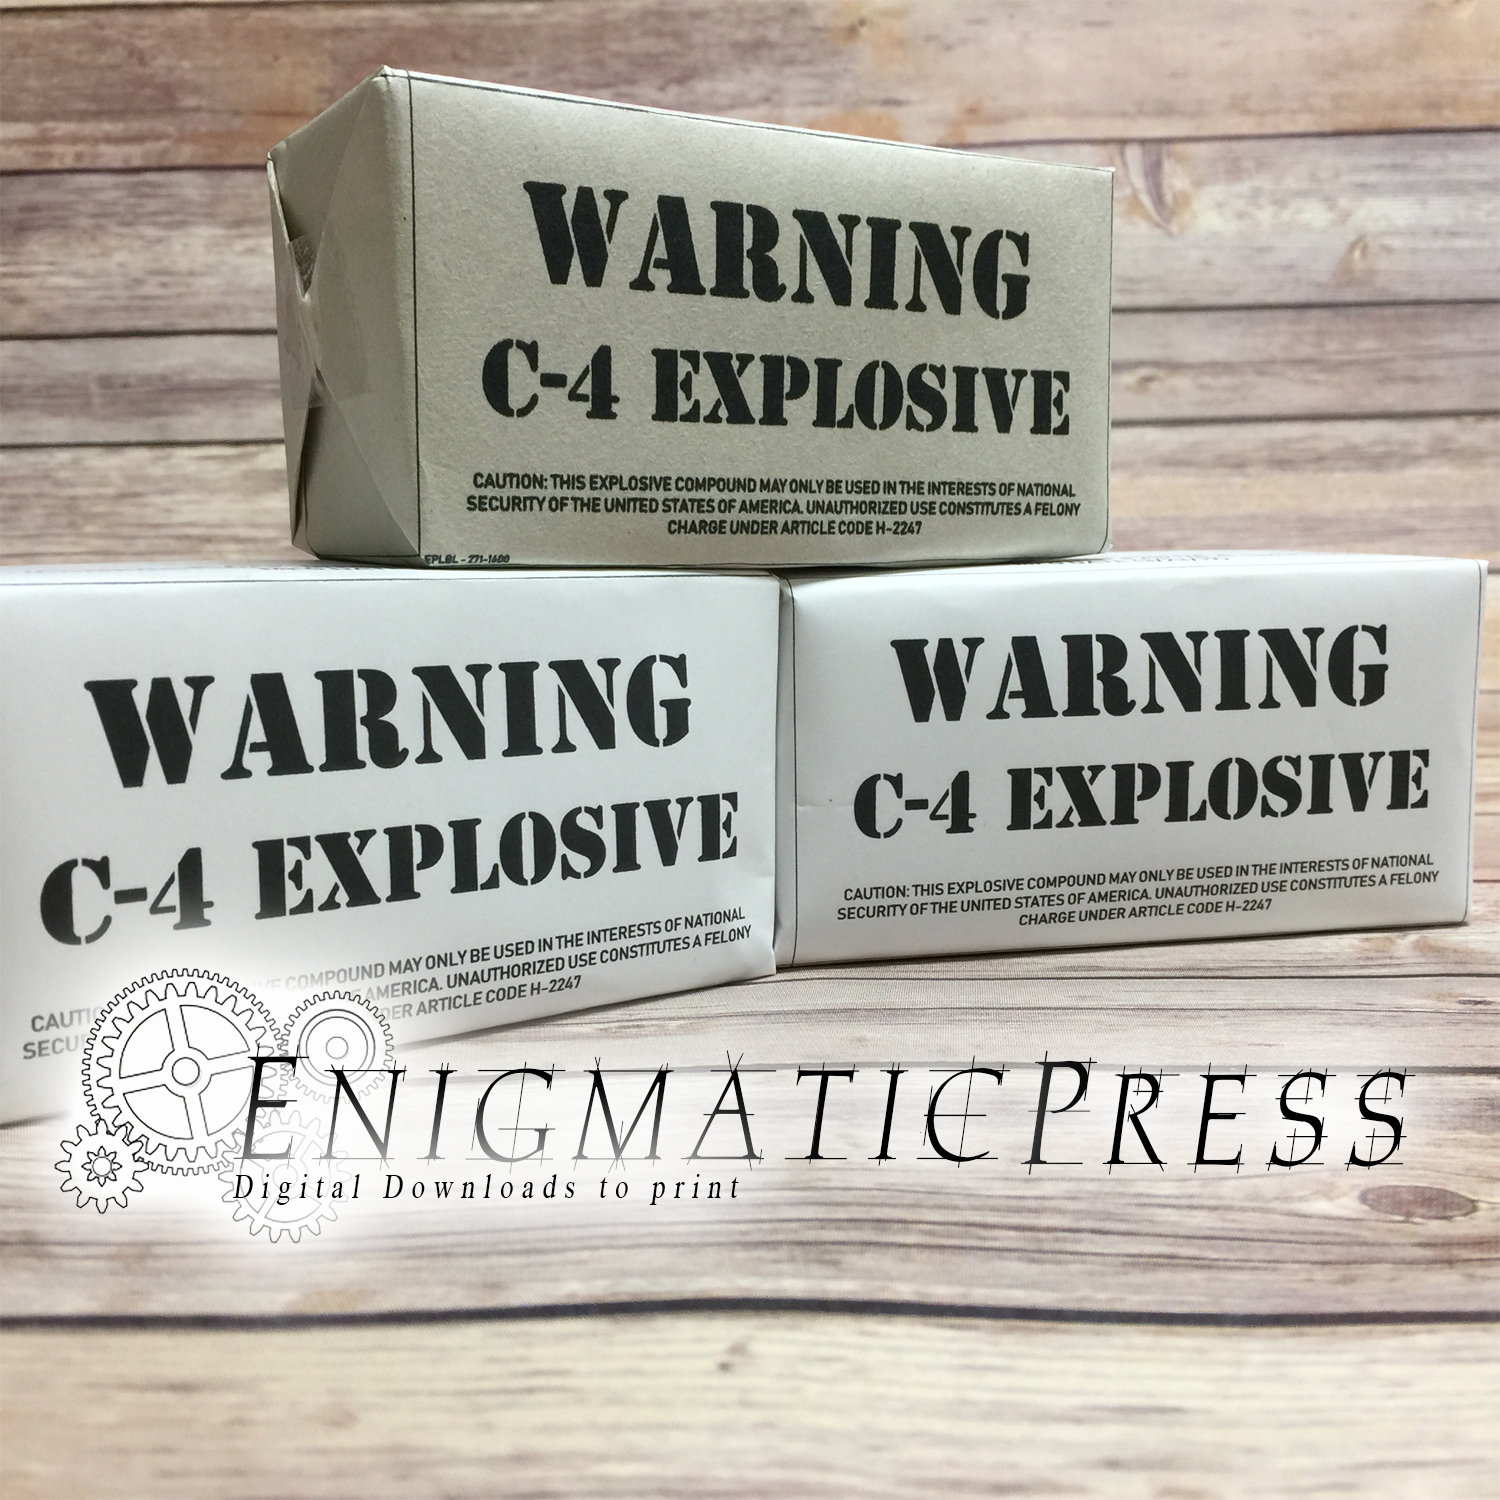 Leave an impression with blocks of fake C4 explosive – Stv.Whtly